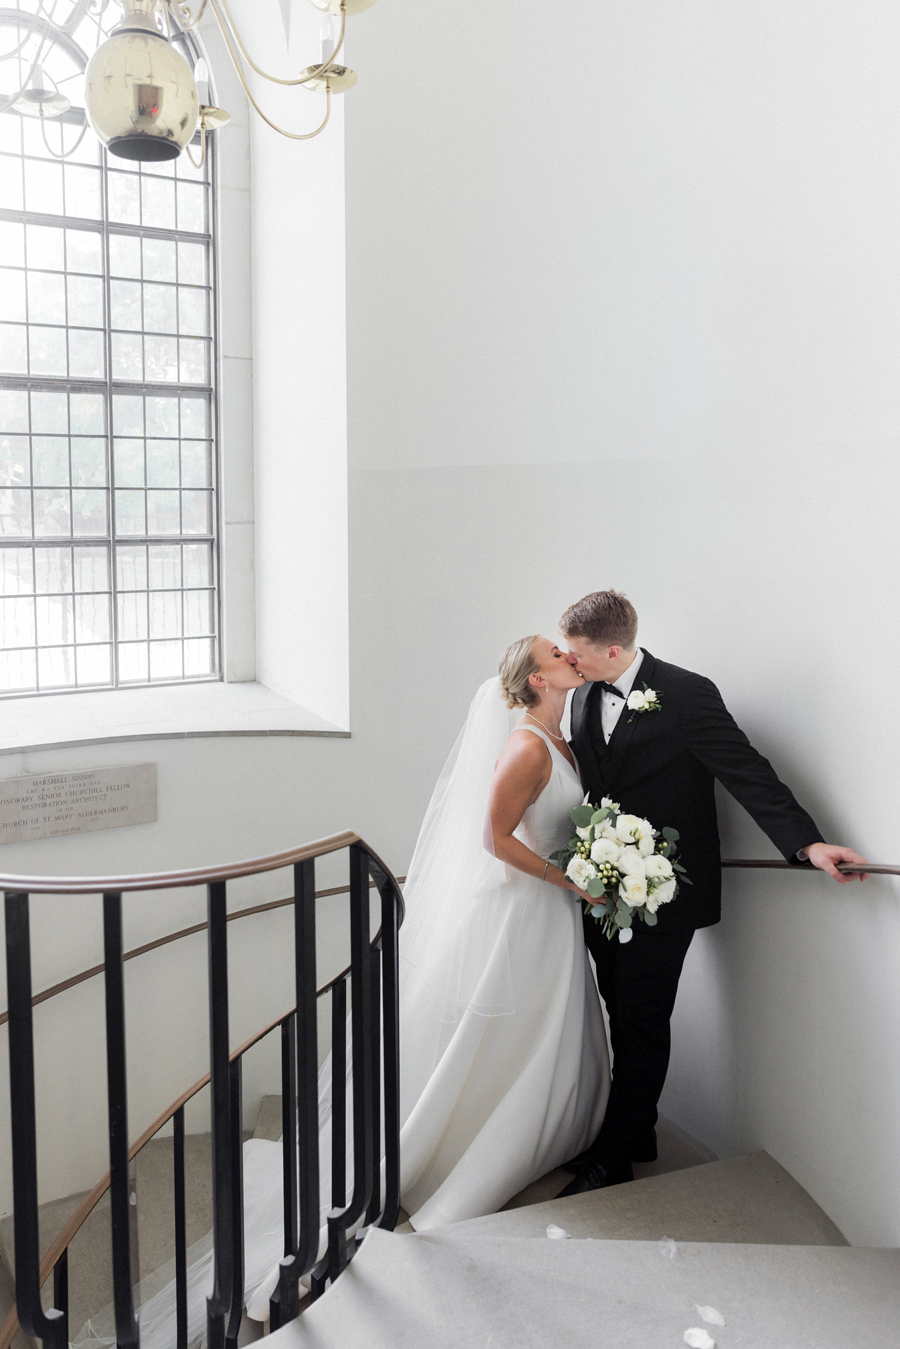 The bride and groom pose for portraits in the circular staircase at the Church of St. Mary, Aldermanbury at a Westminster College wedding by Love Tree Studios.